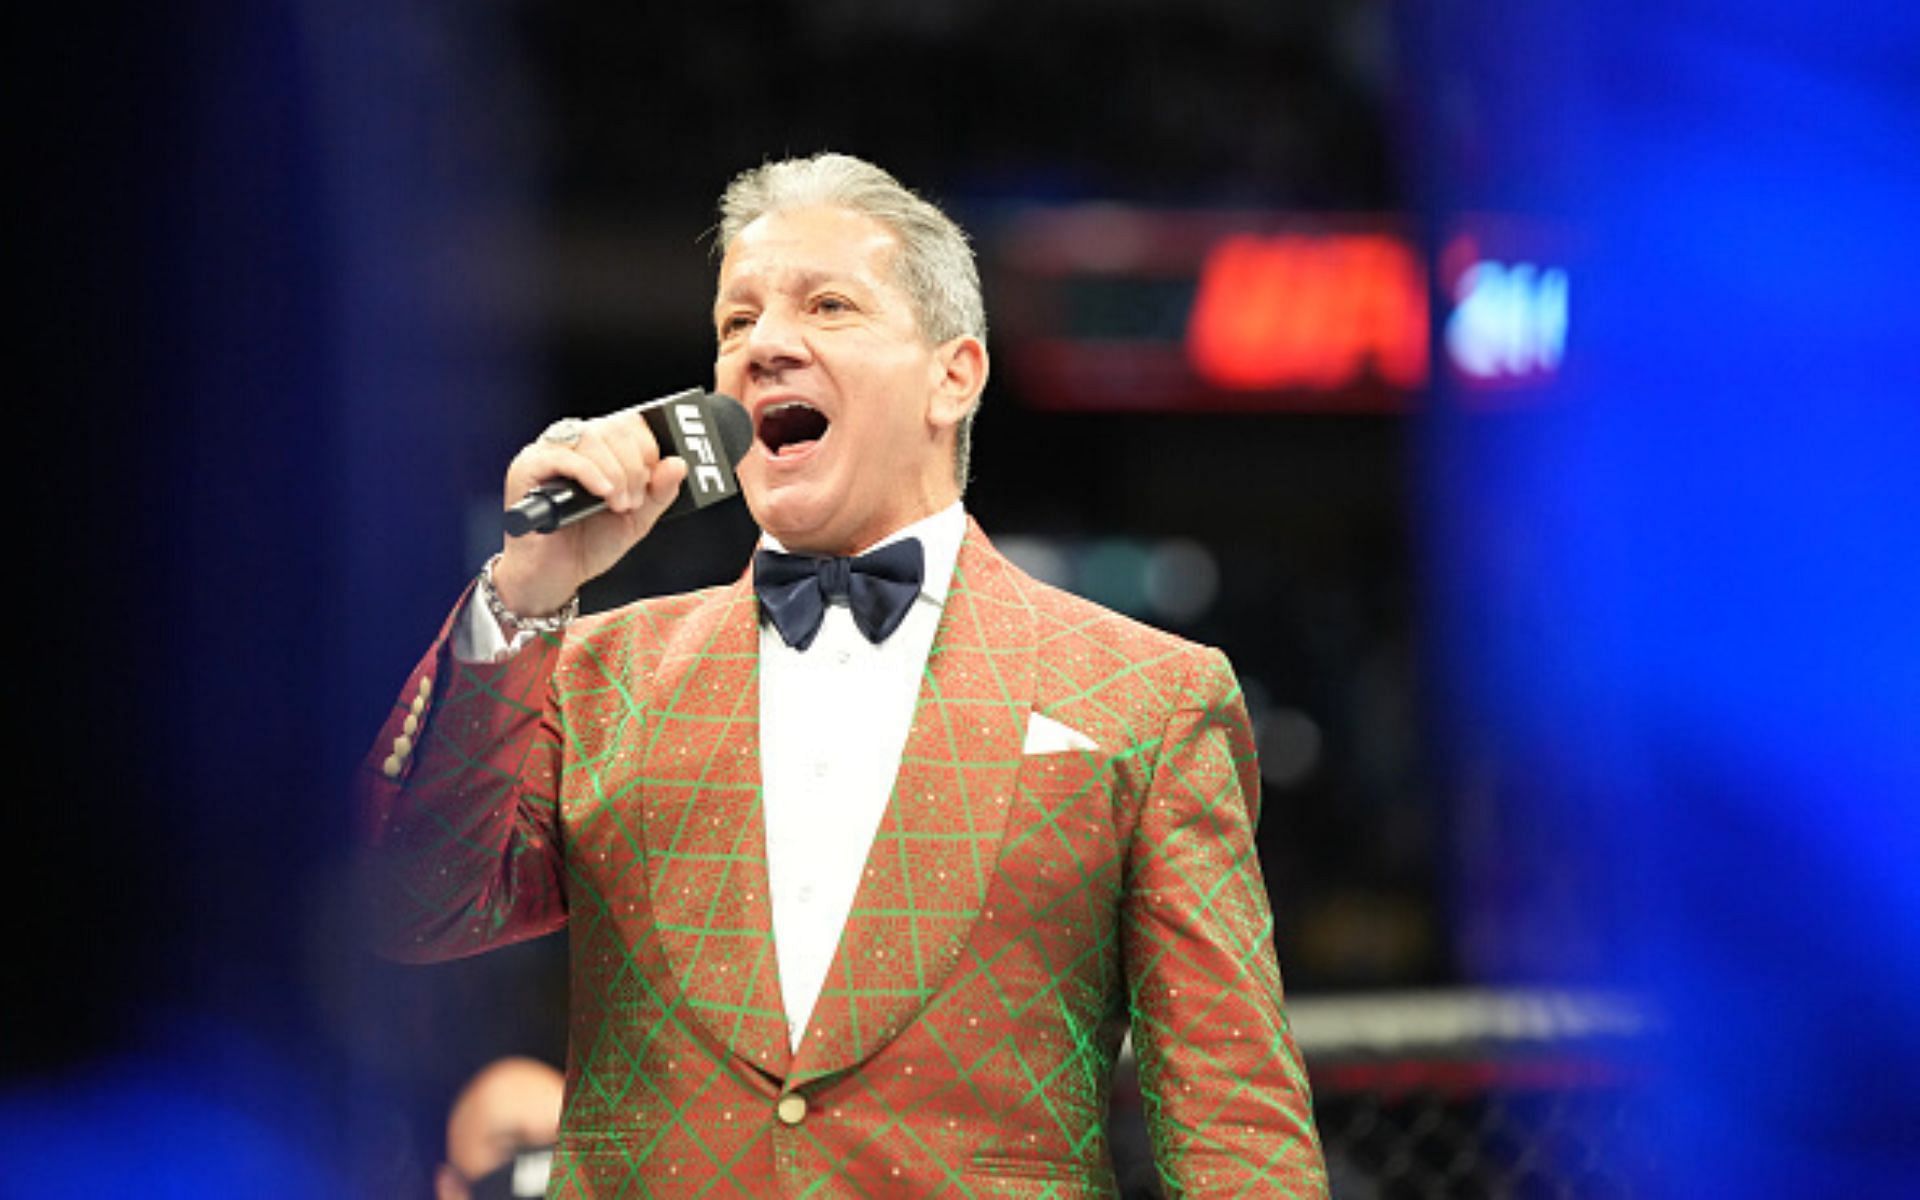 UFC Fight Tonight - Bruce Buffer at UFC event [Image courtesy: Getty]